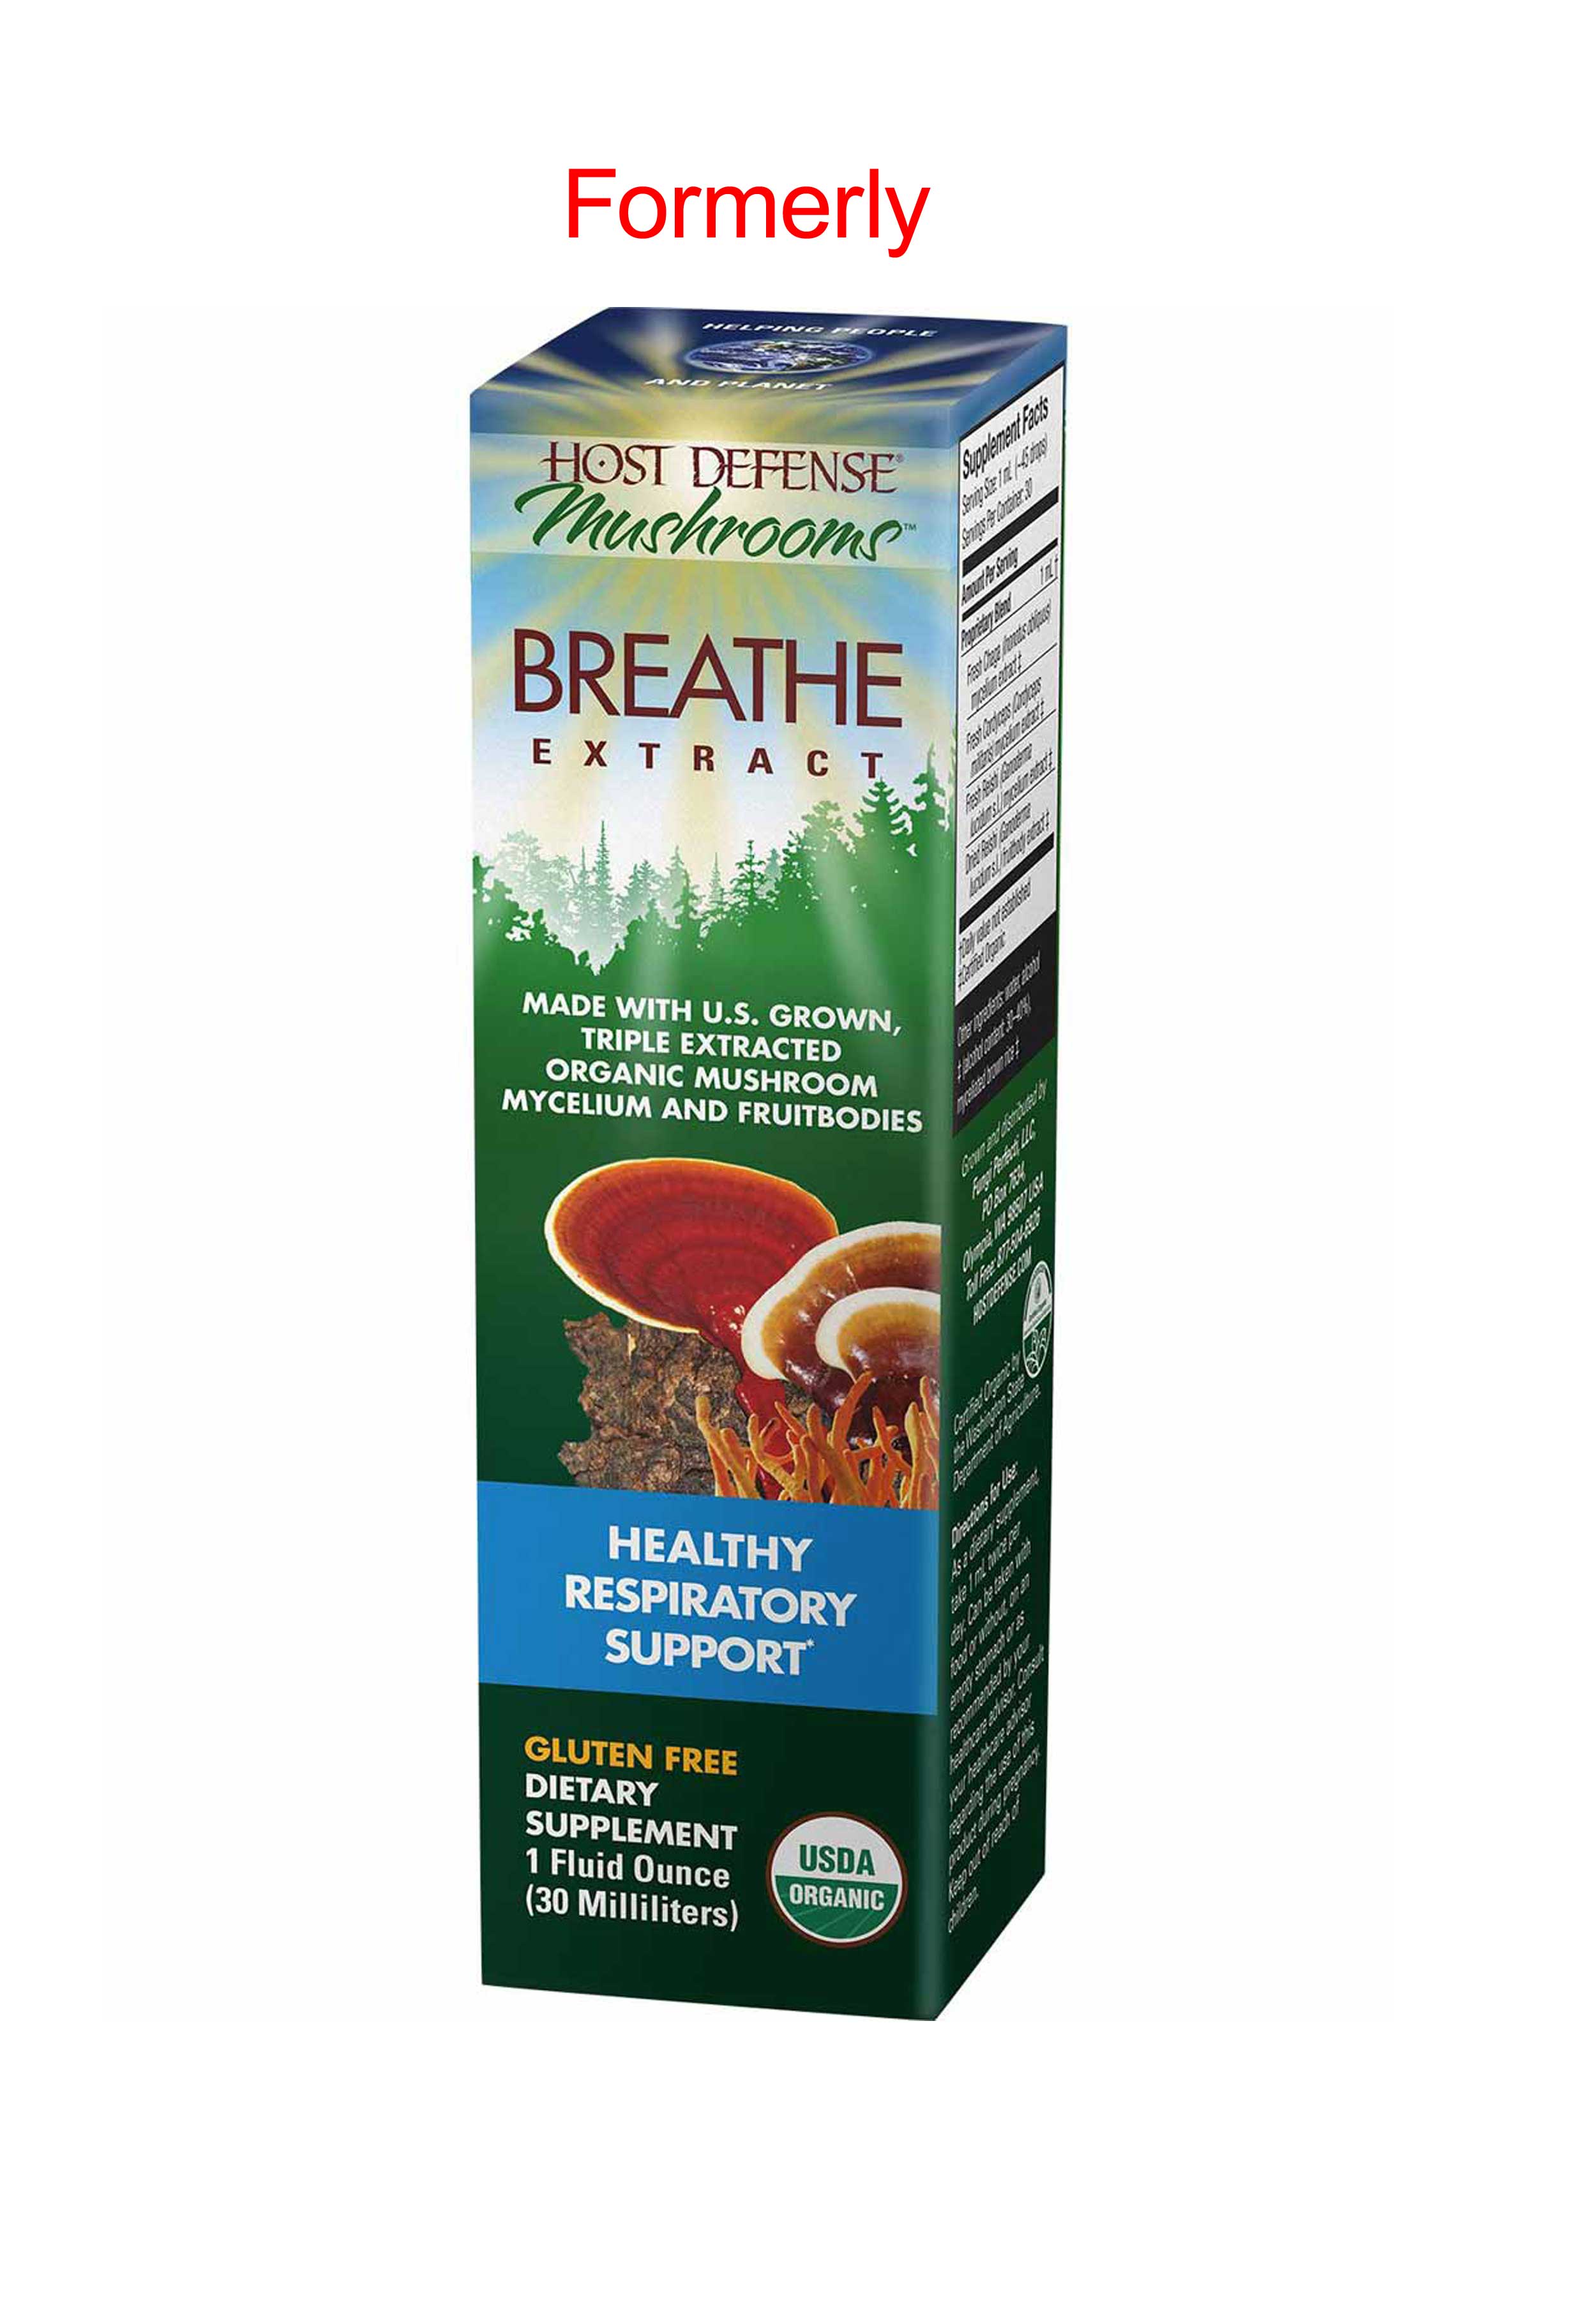 Host Defense Breathe Extract Formerly